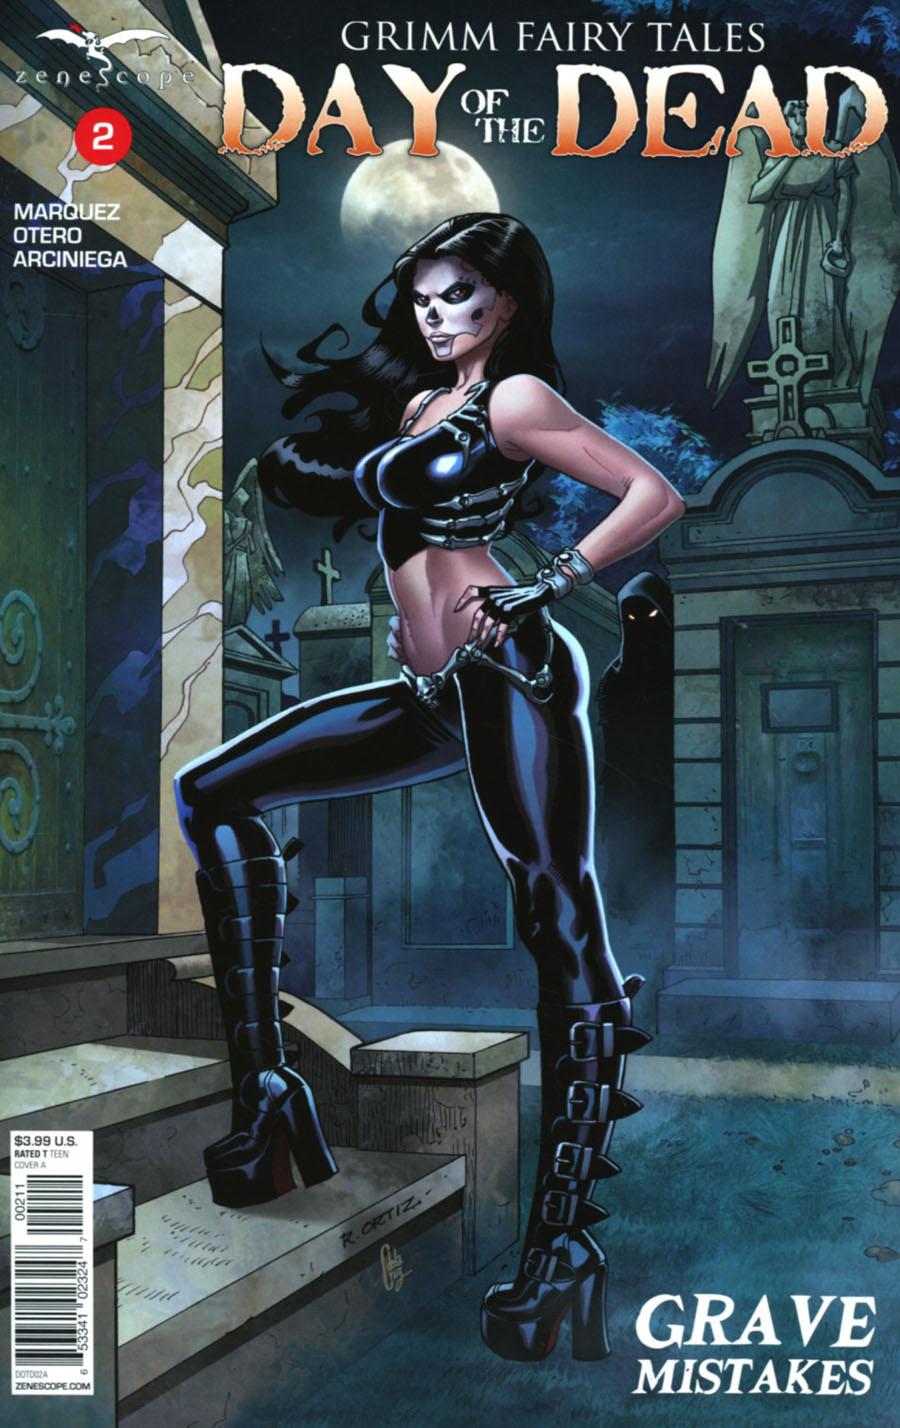 Grimm Fairy Tales Presents Day Of The Dead Vol. 1 #2